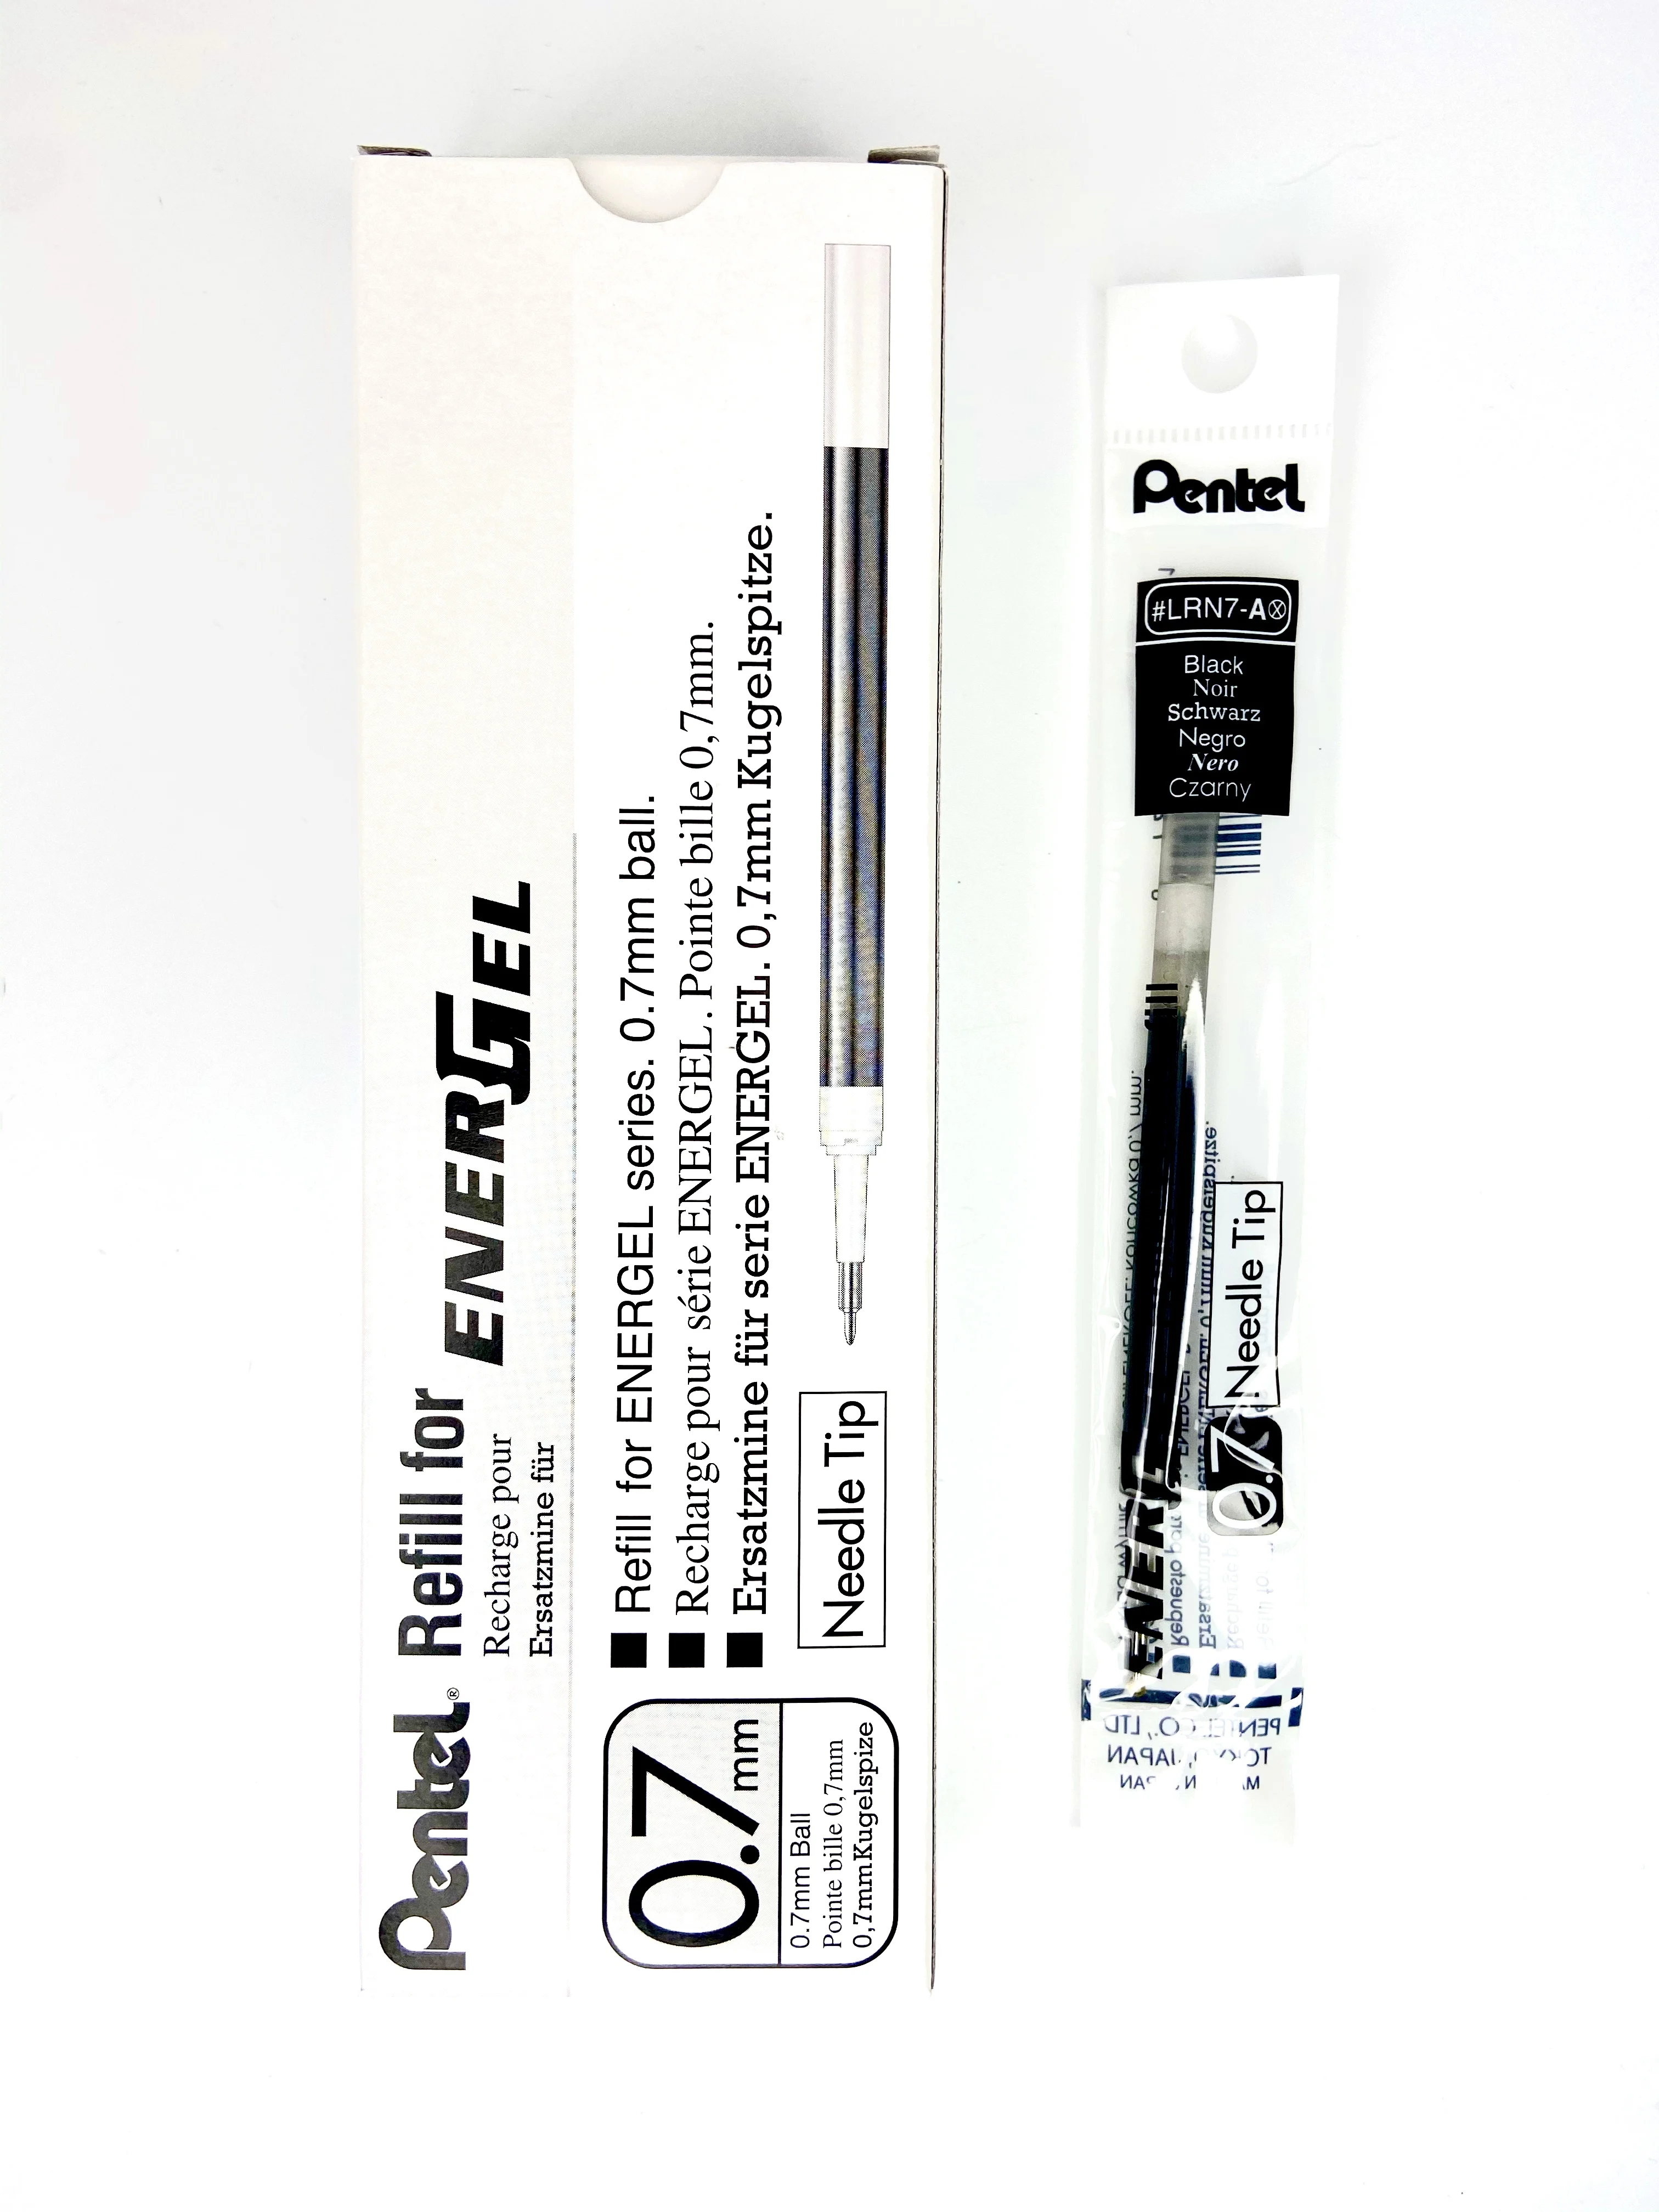 

Pentel Energel Gel Refill LRN5 LRN4 0.5/0.4mm for BLN75 / BLN105 smooth and quick-drying student stationery supplies